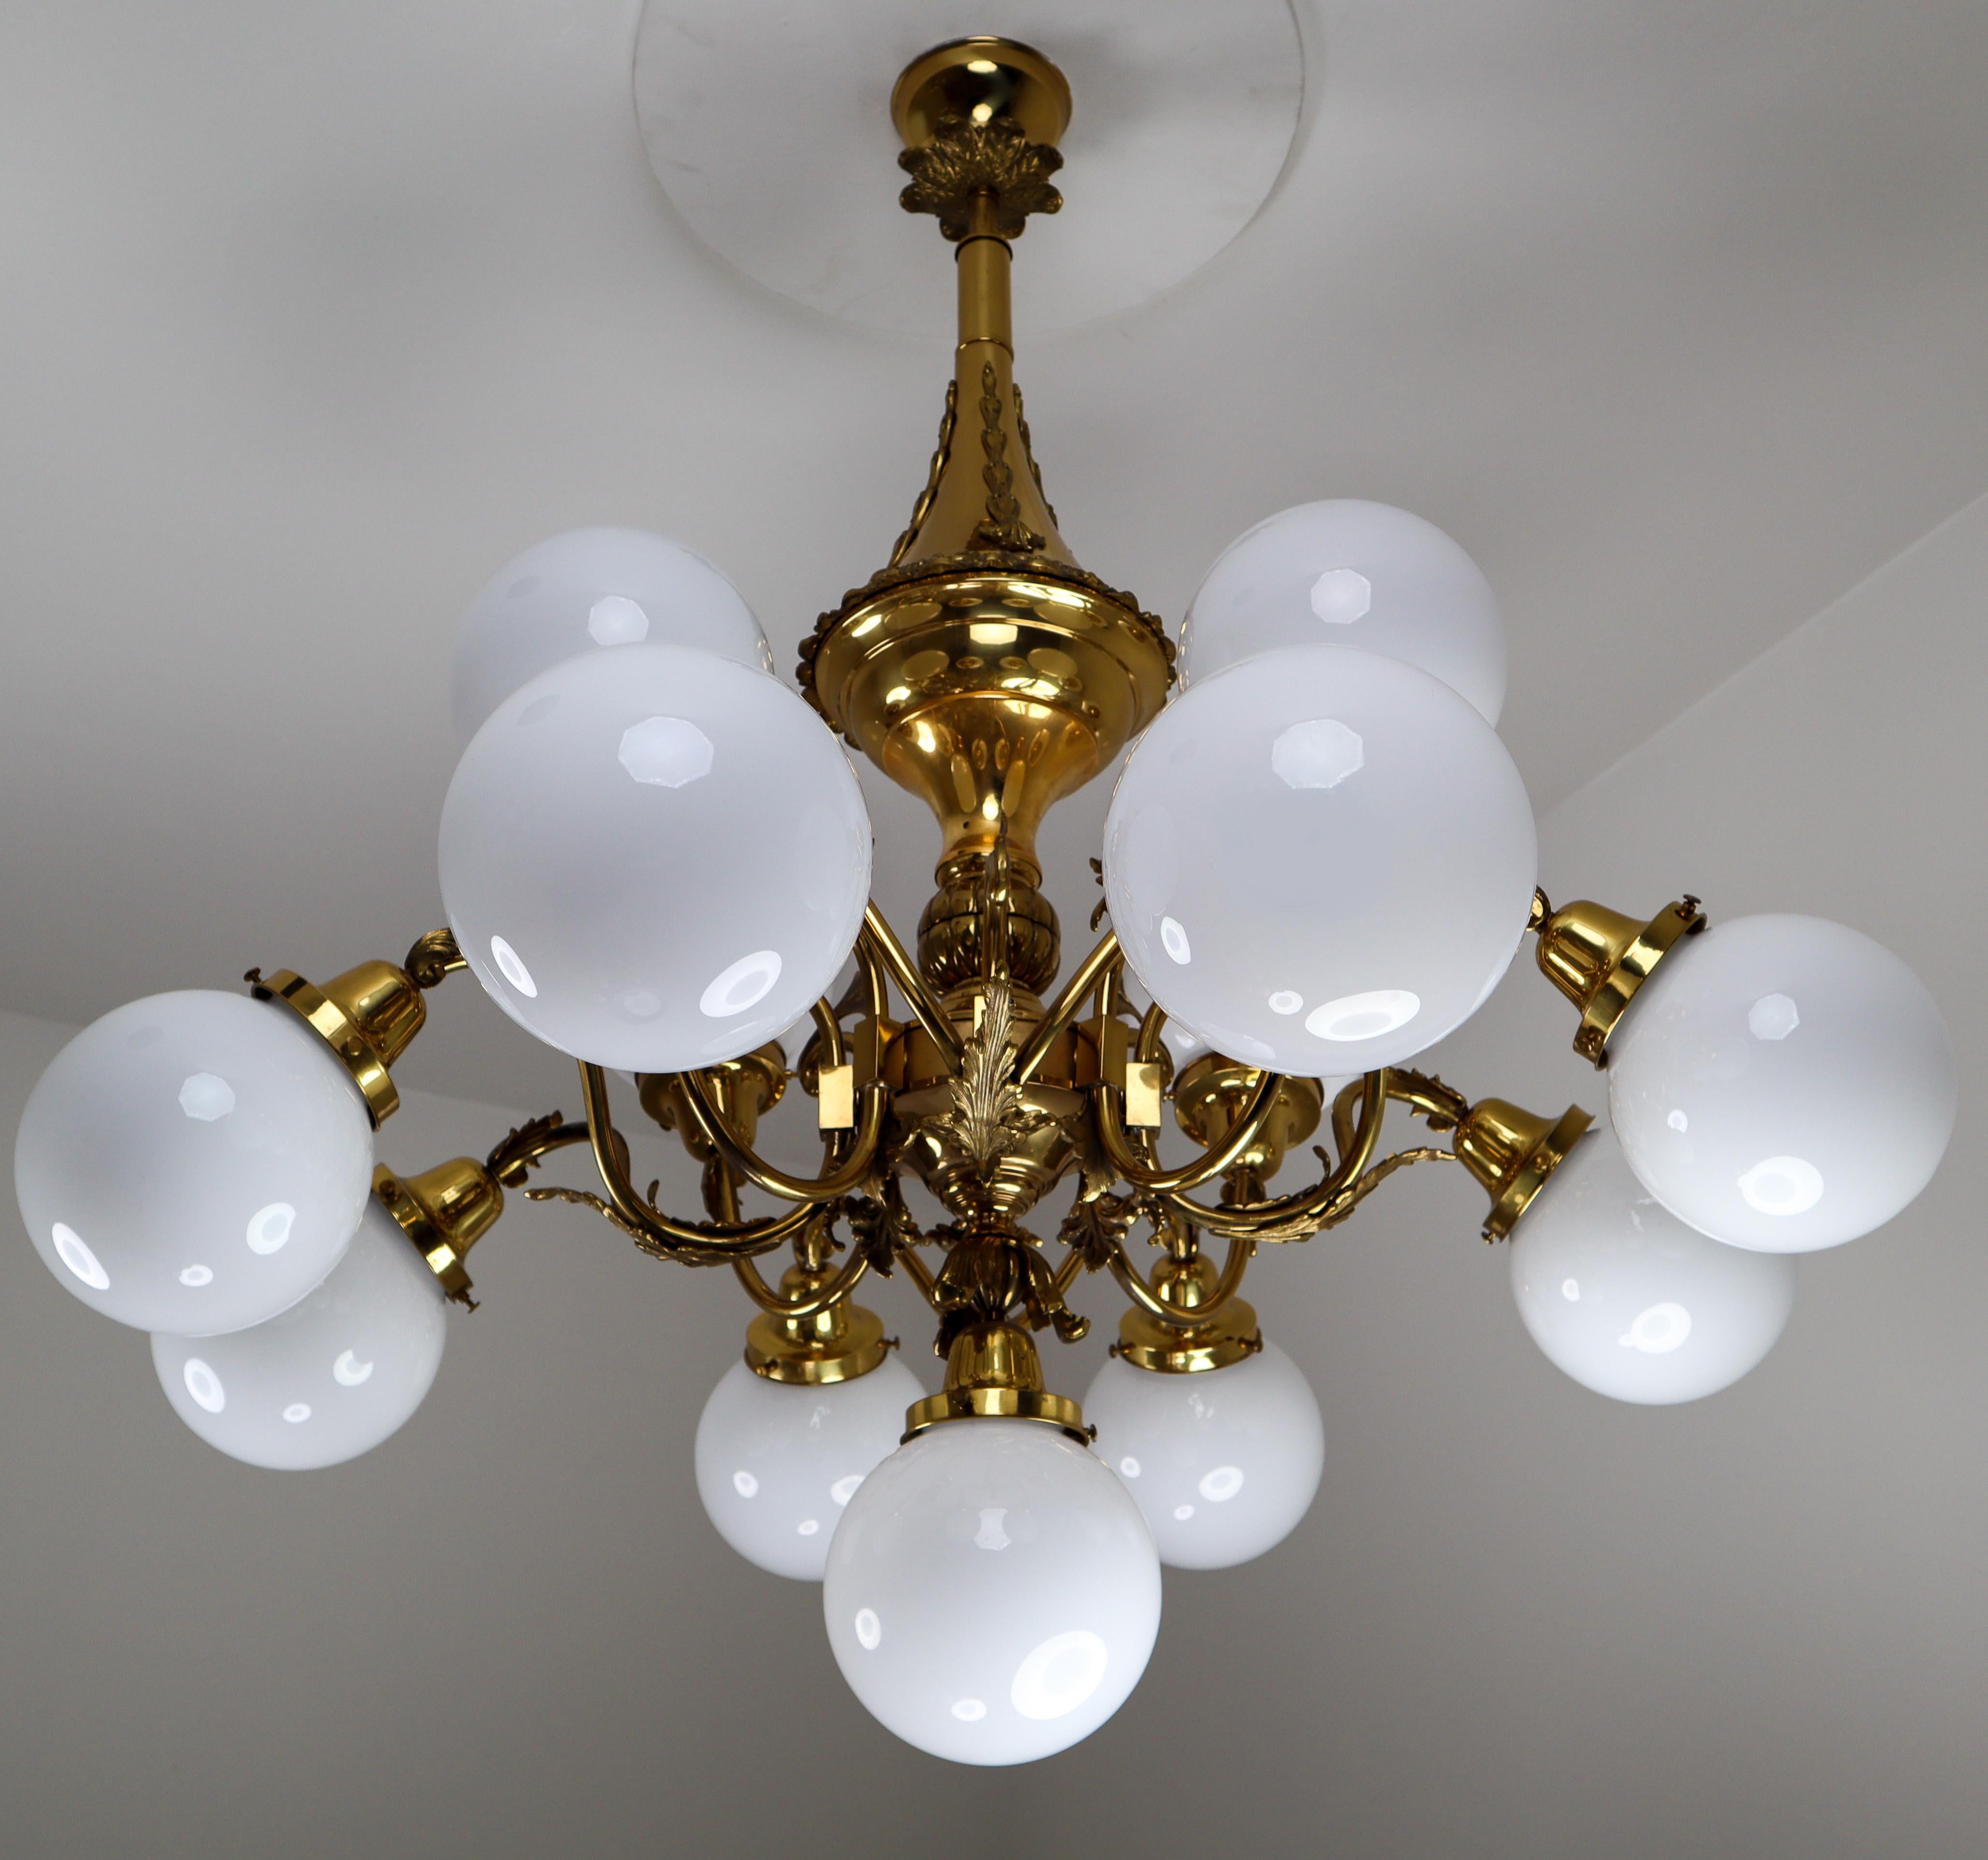 Monumental brass chandelier and four wall lights with opaline glass globes from the National Gallery Praque.

Monumental and chic design chandelier and four wall lights with high quality brass fixture and luxury opaline glass globes. This